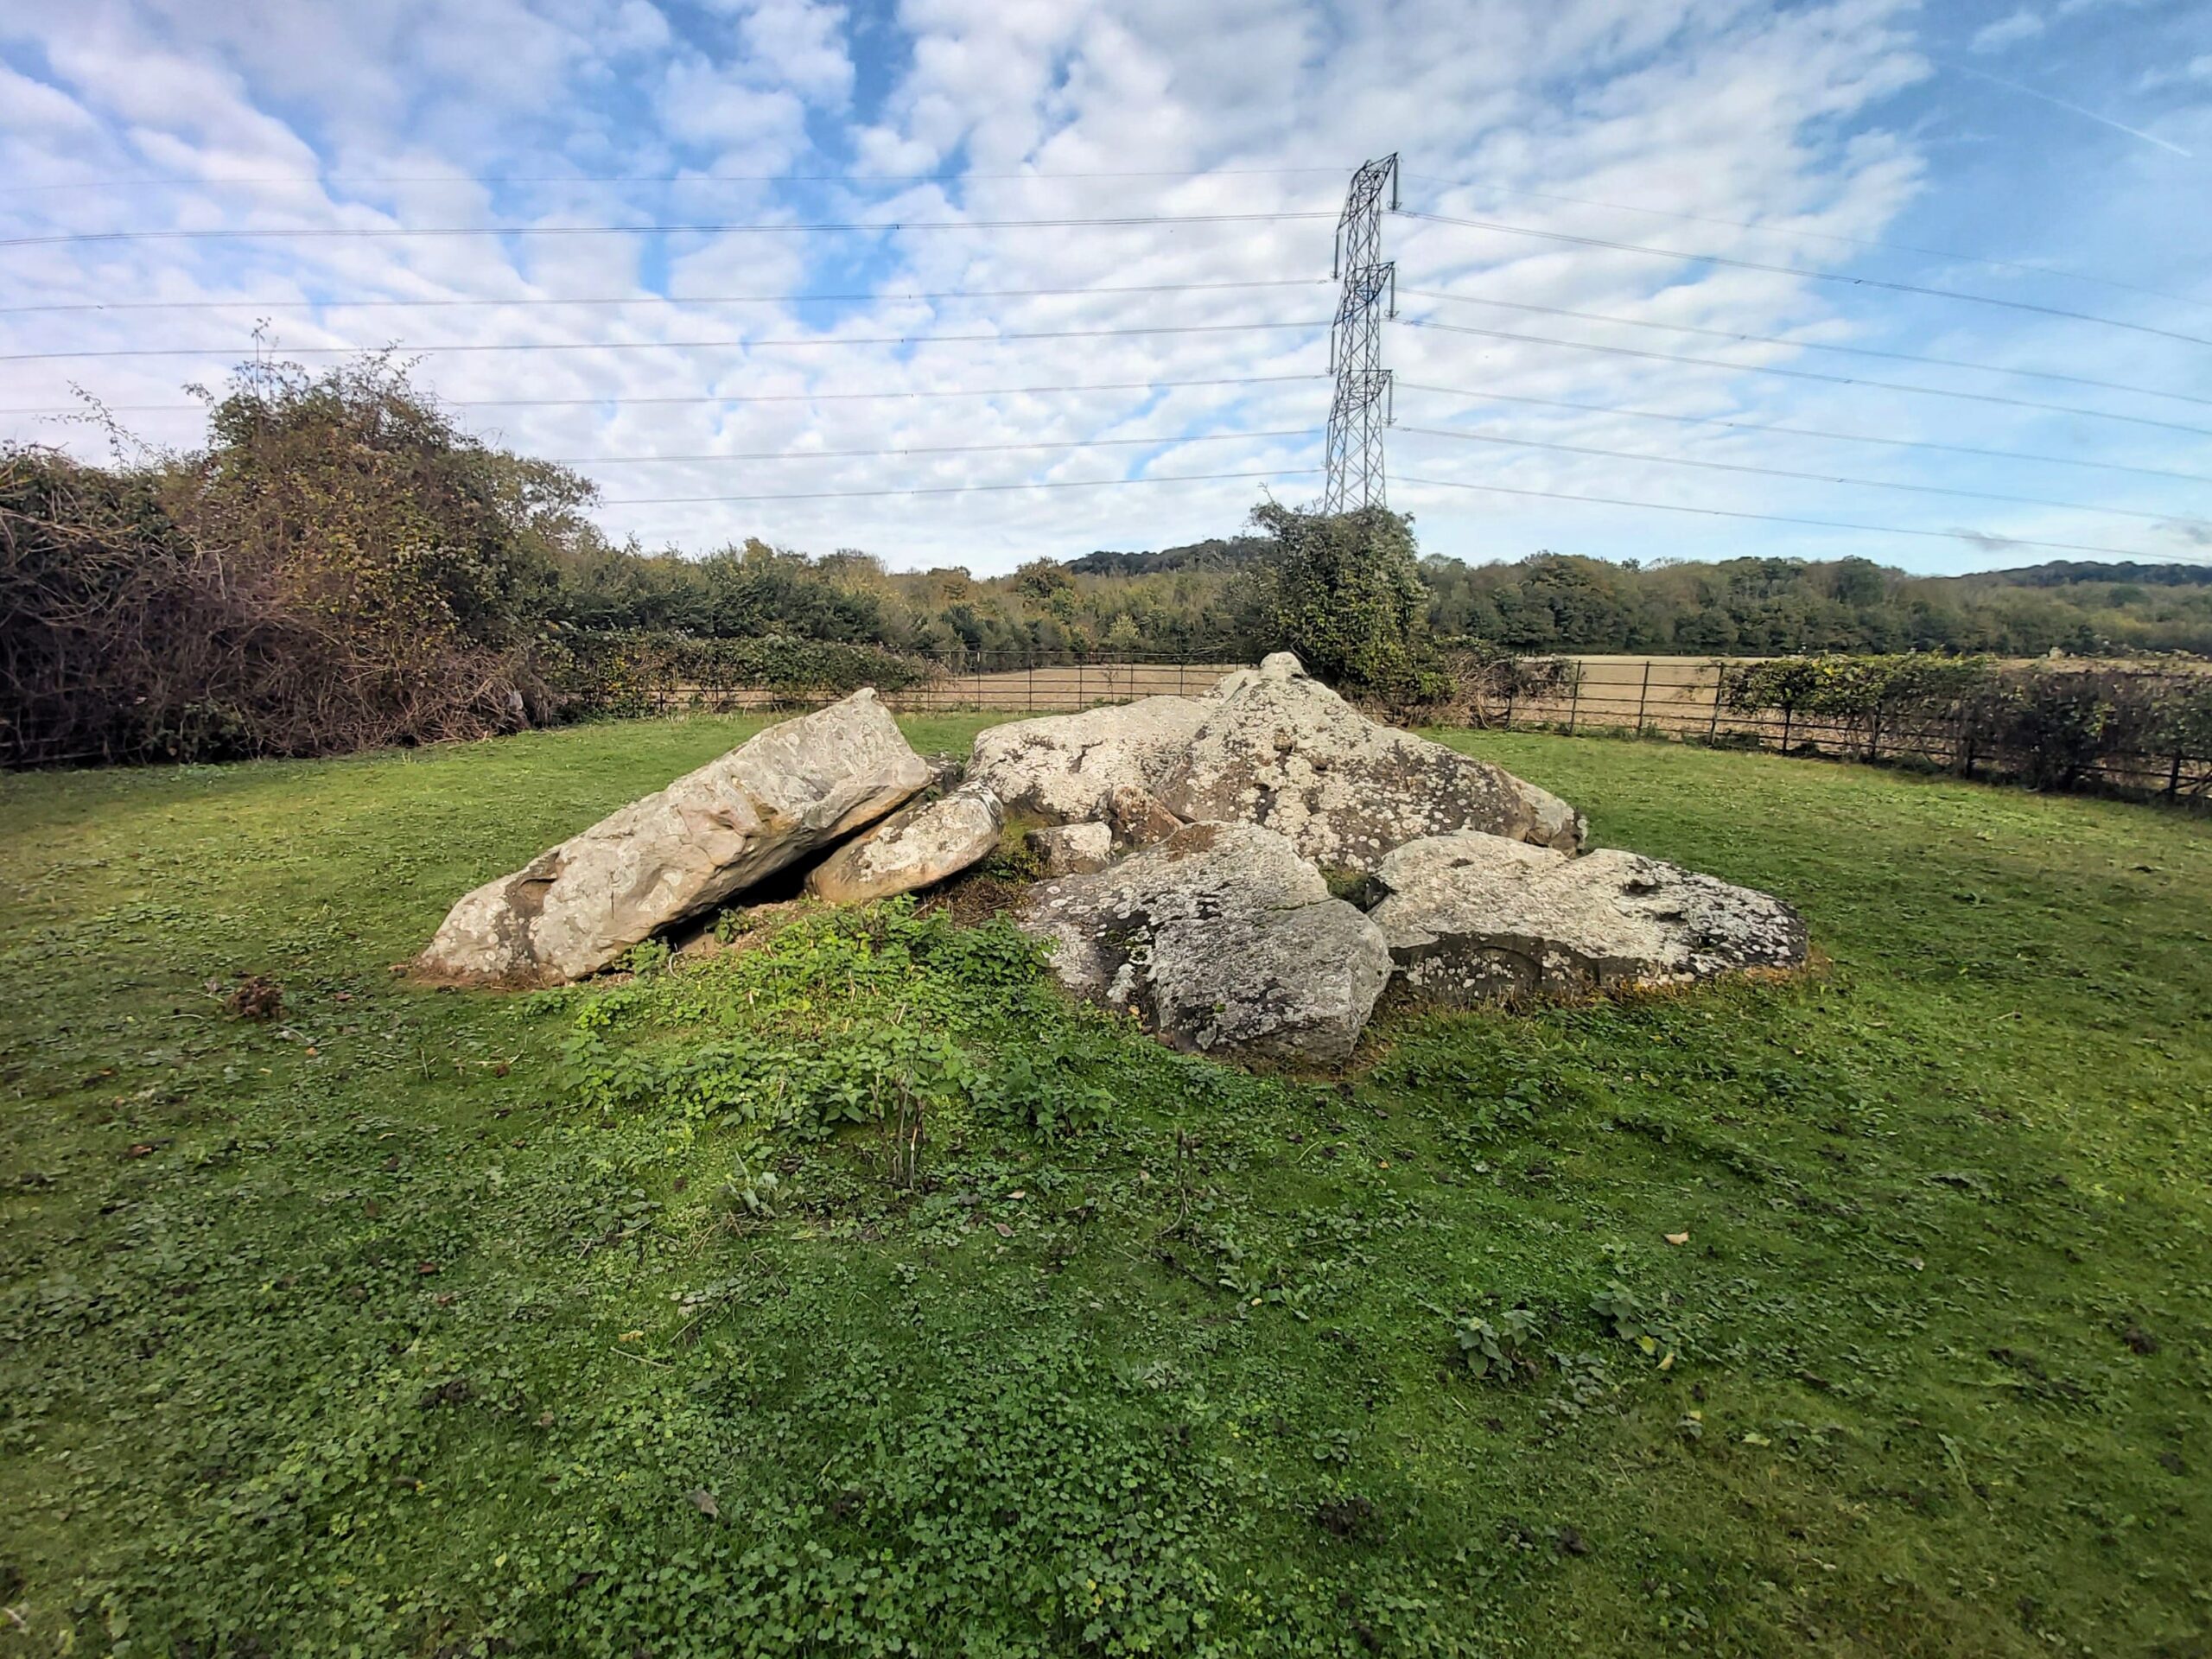 The Countless Stones, neolithic ruins at Aylesford, Kent, England.